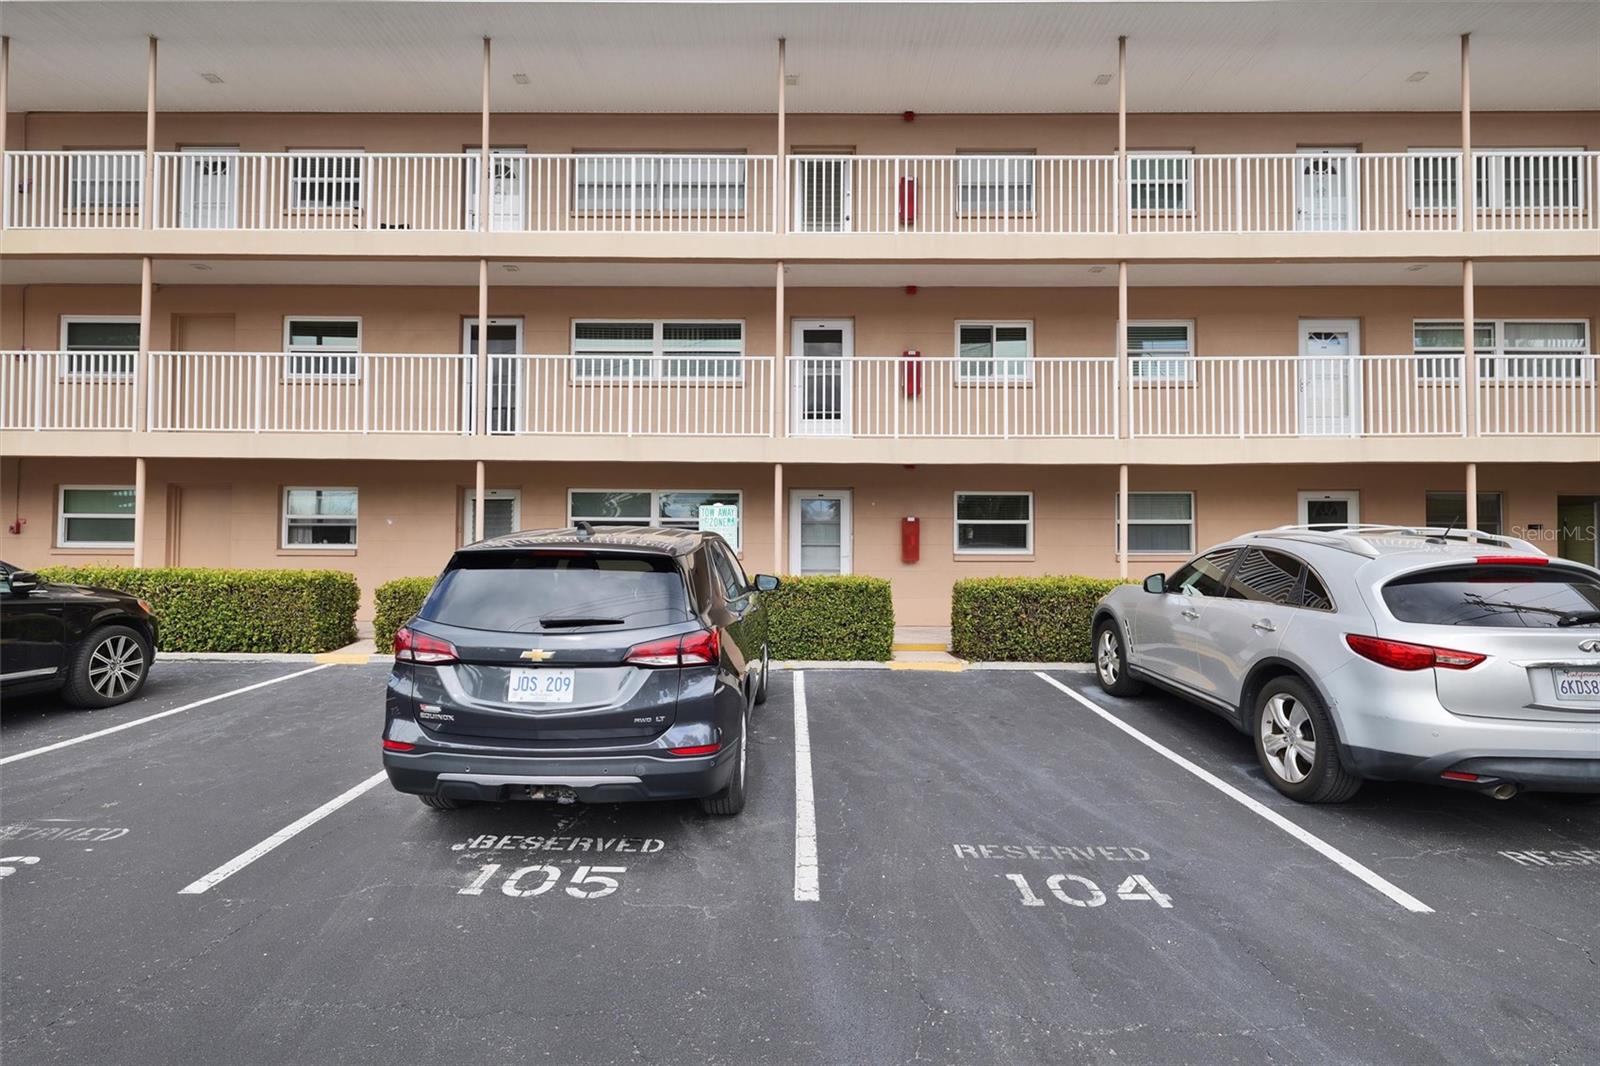 Parking space 105 is assigned directly in front of the condo.